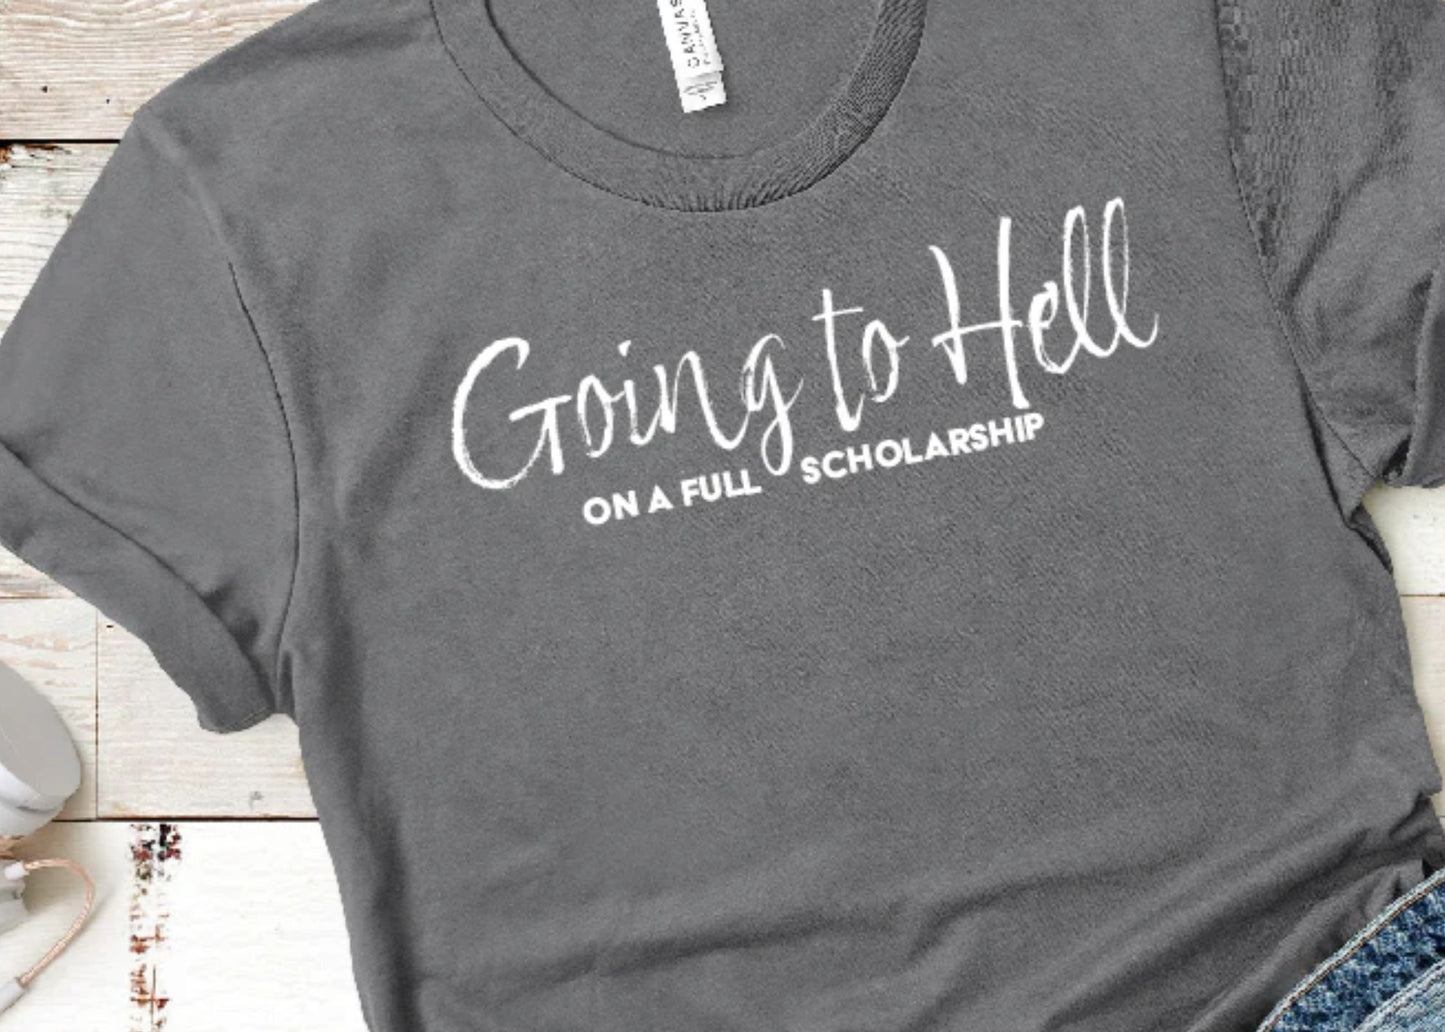 Going To Hell on a Full Scholarship